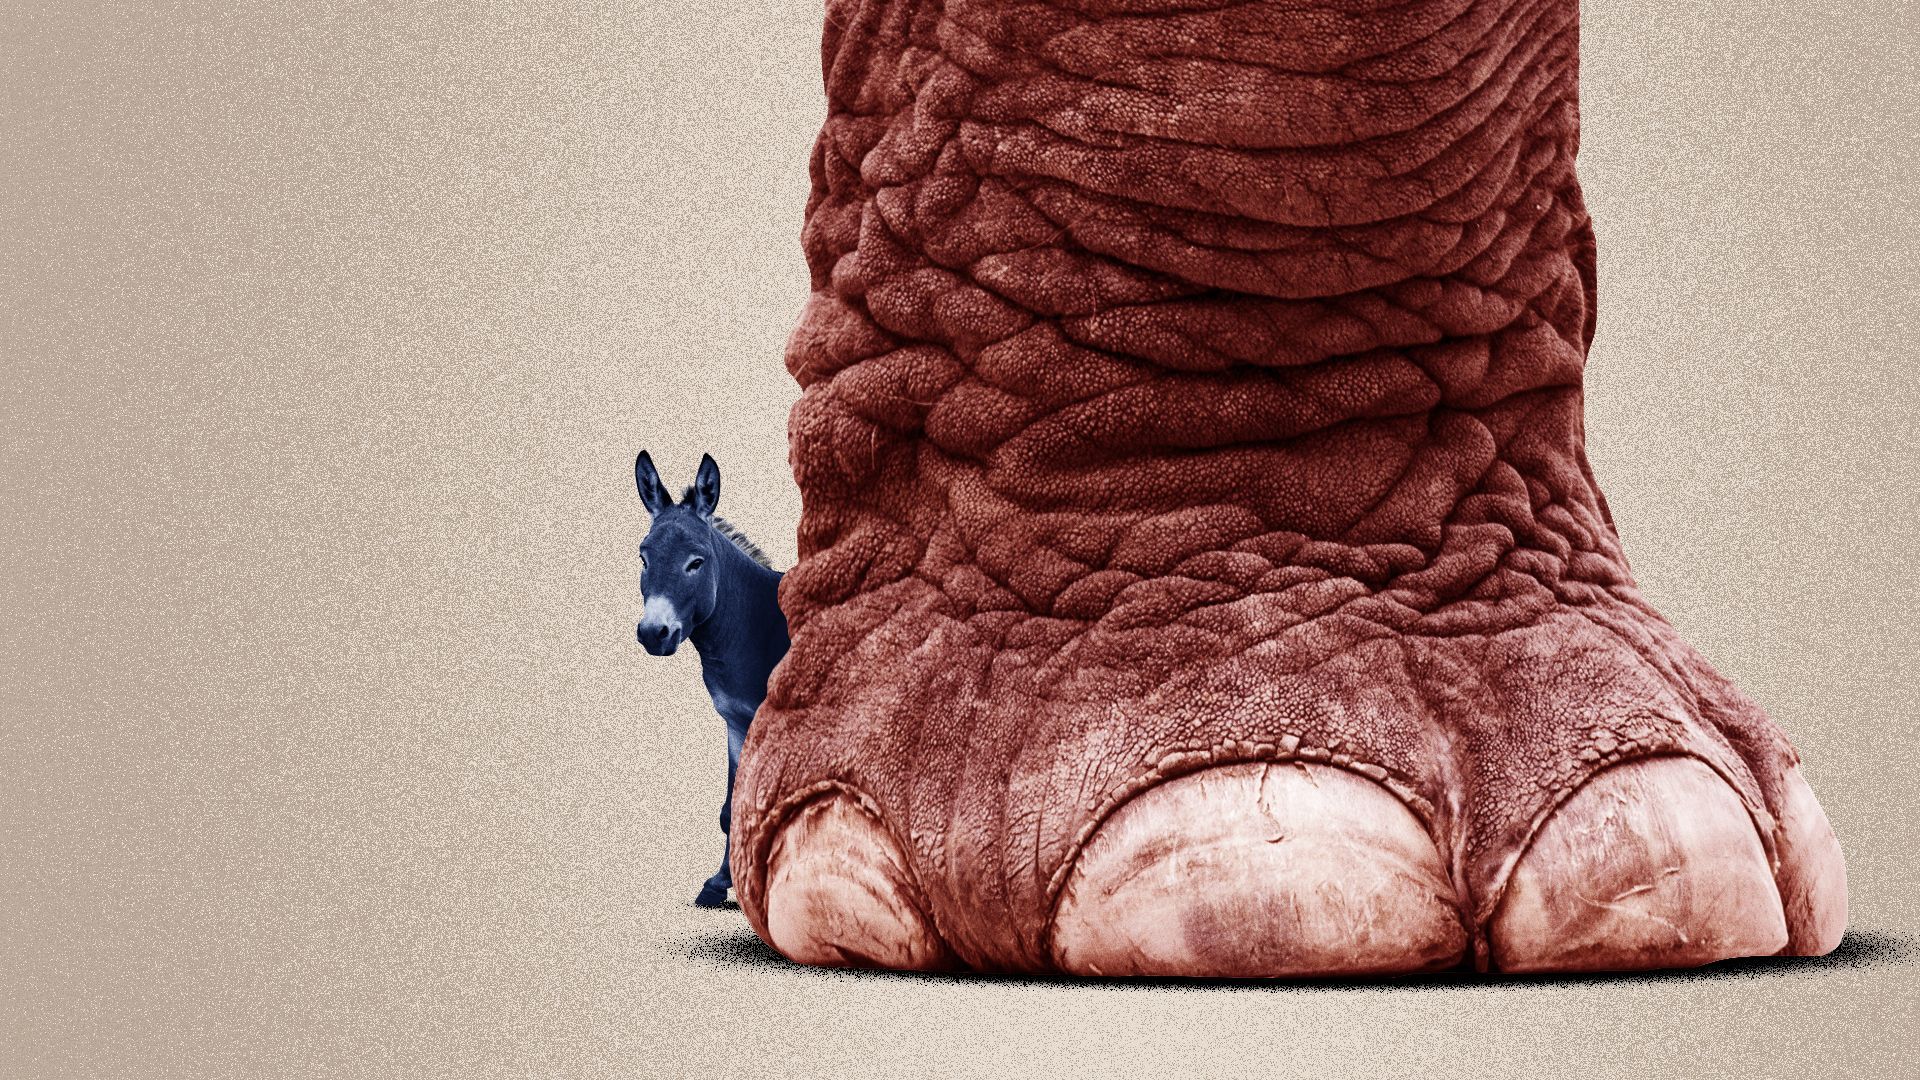 Illustration of a small blue donkey hiding behind a large red elephant foot.